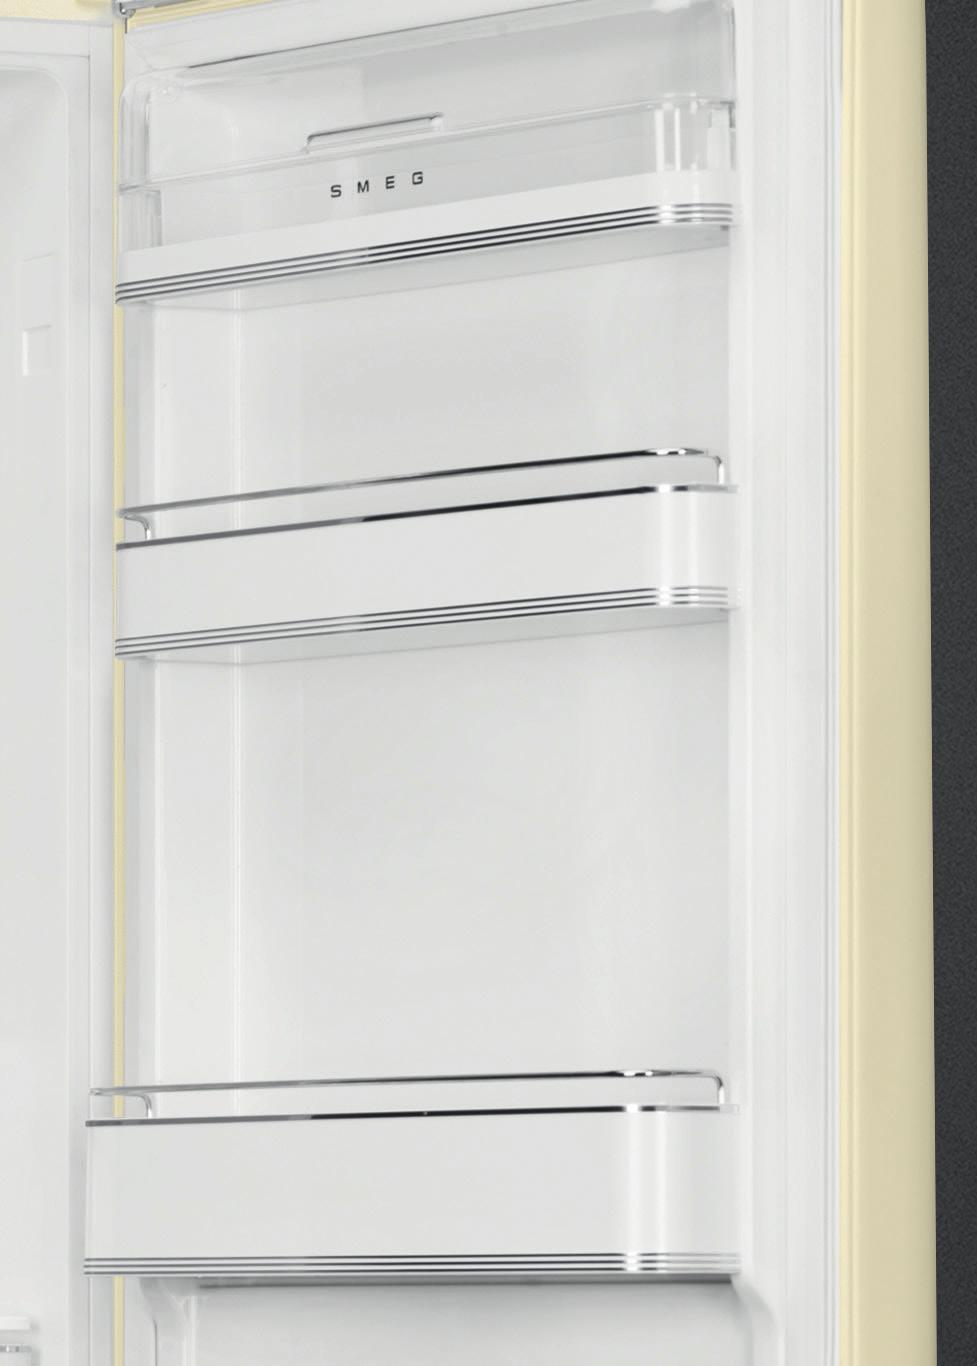 FAB32 ELEGANT CHROME- PLATED TRIM The profiles of the glass shelves and balconies feature shiny chrome-plated trim which draws on retro design to embellish the refrigerator s interior and inner door.